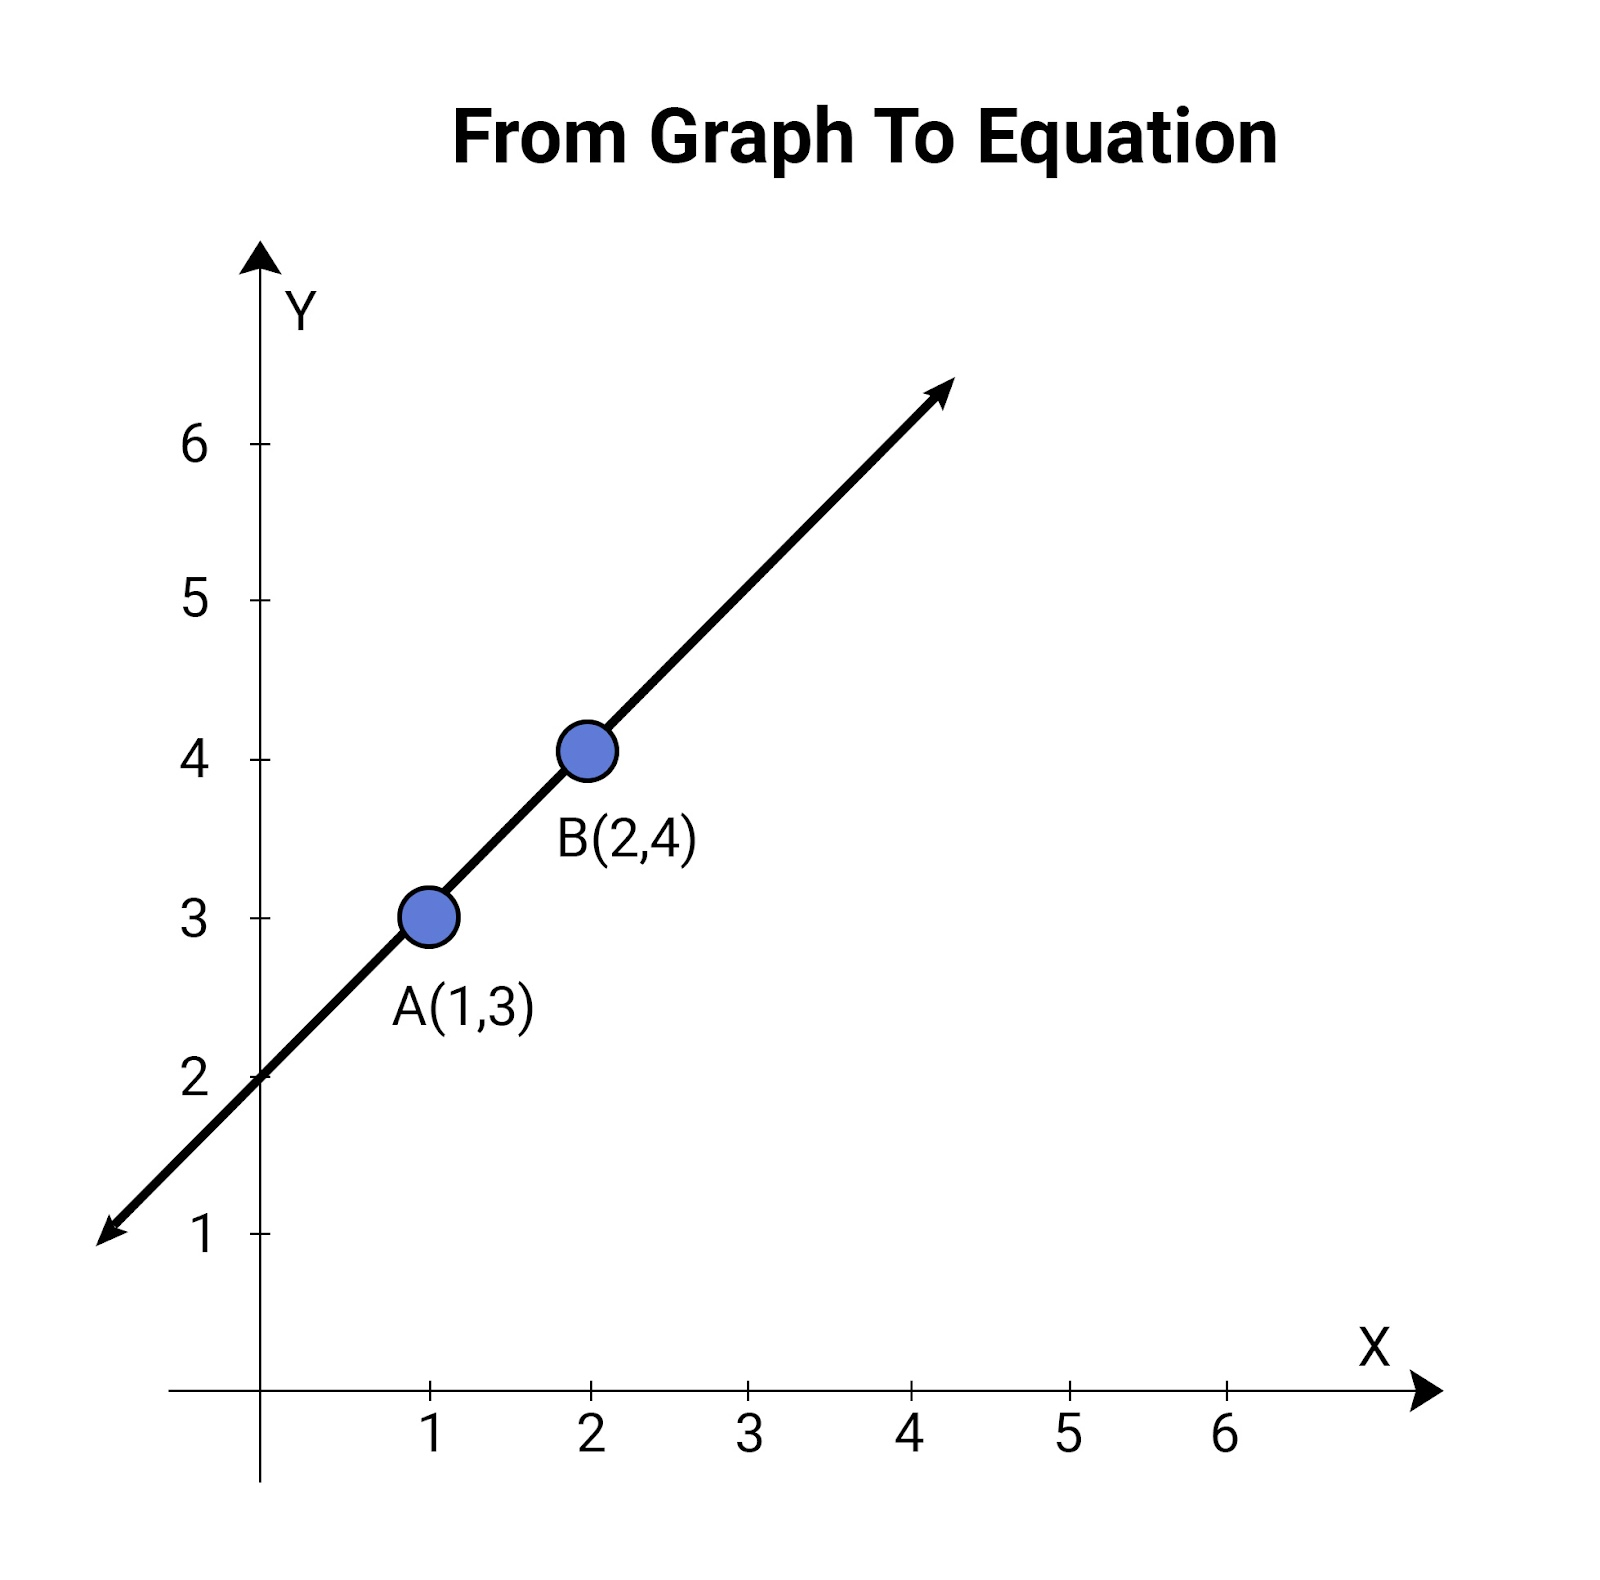 From graph to equation